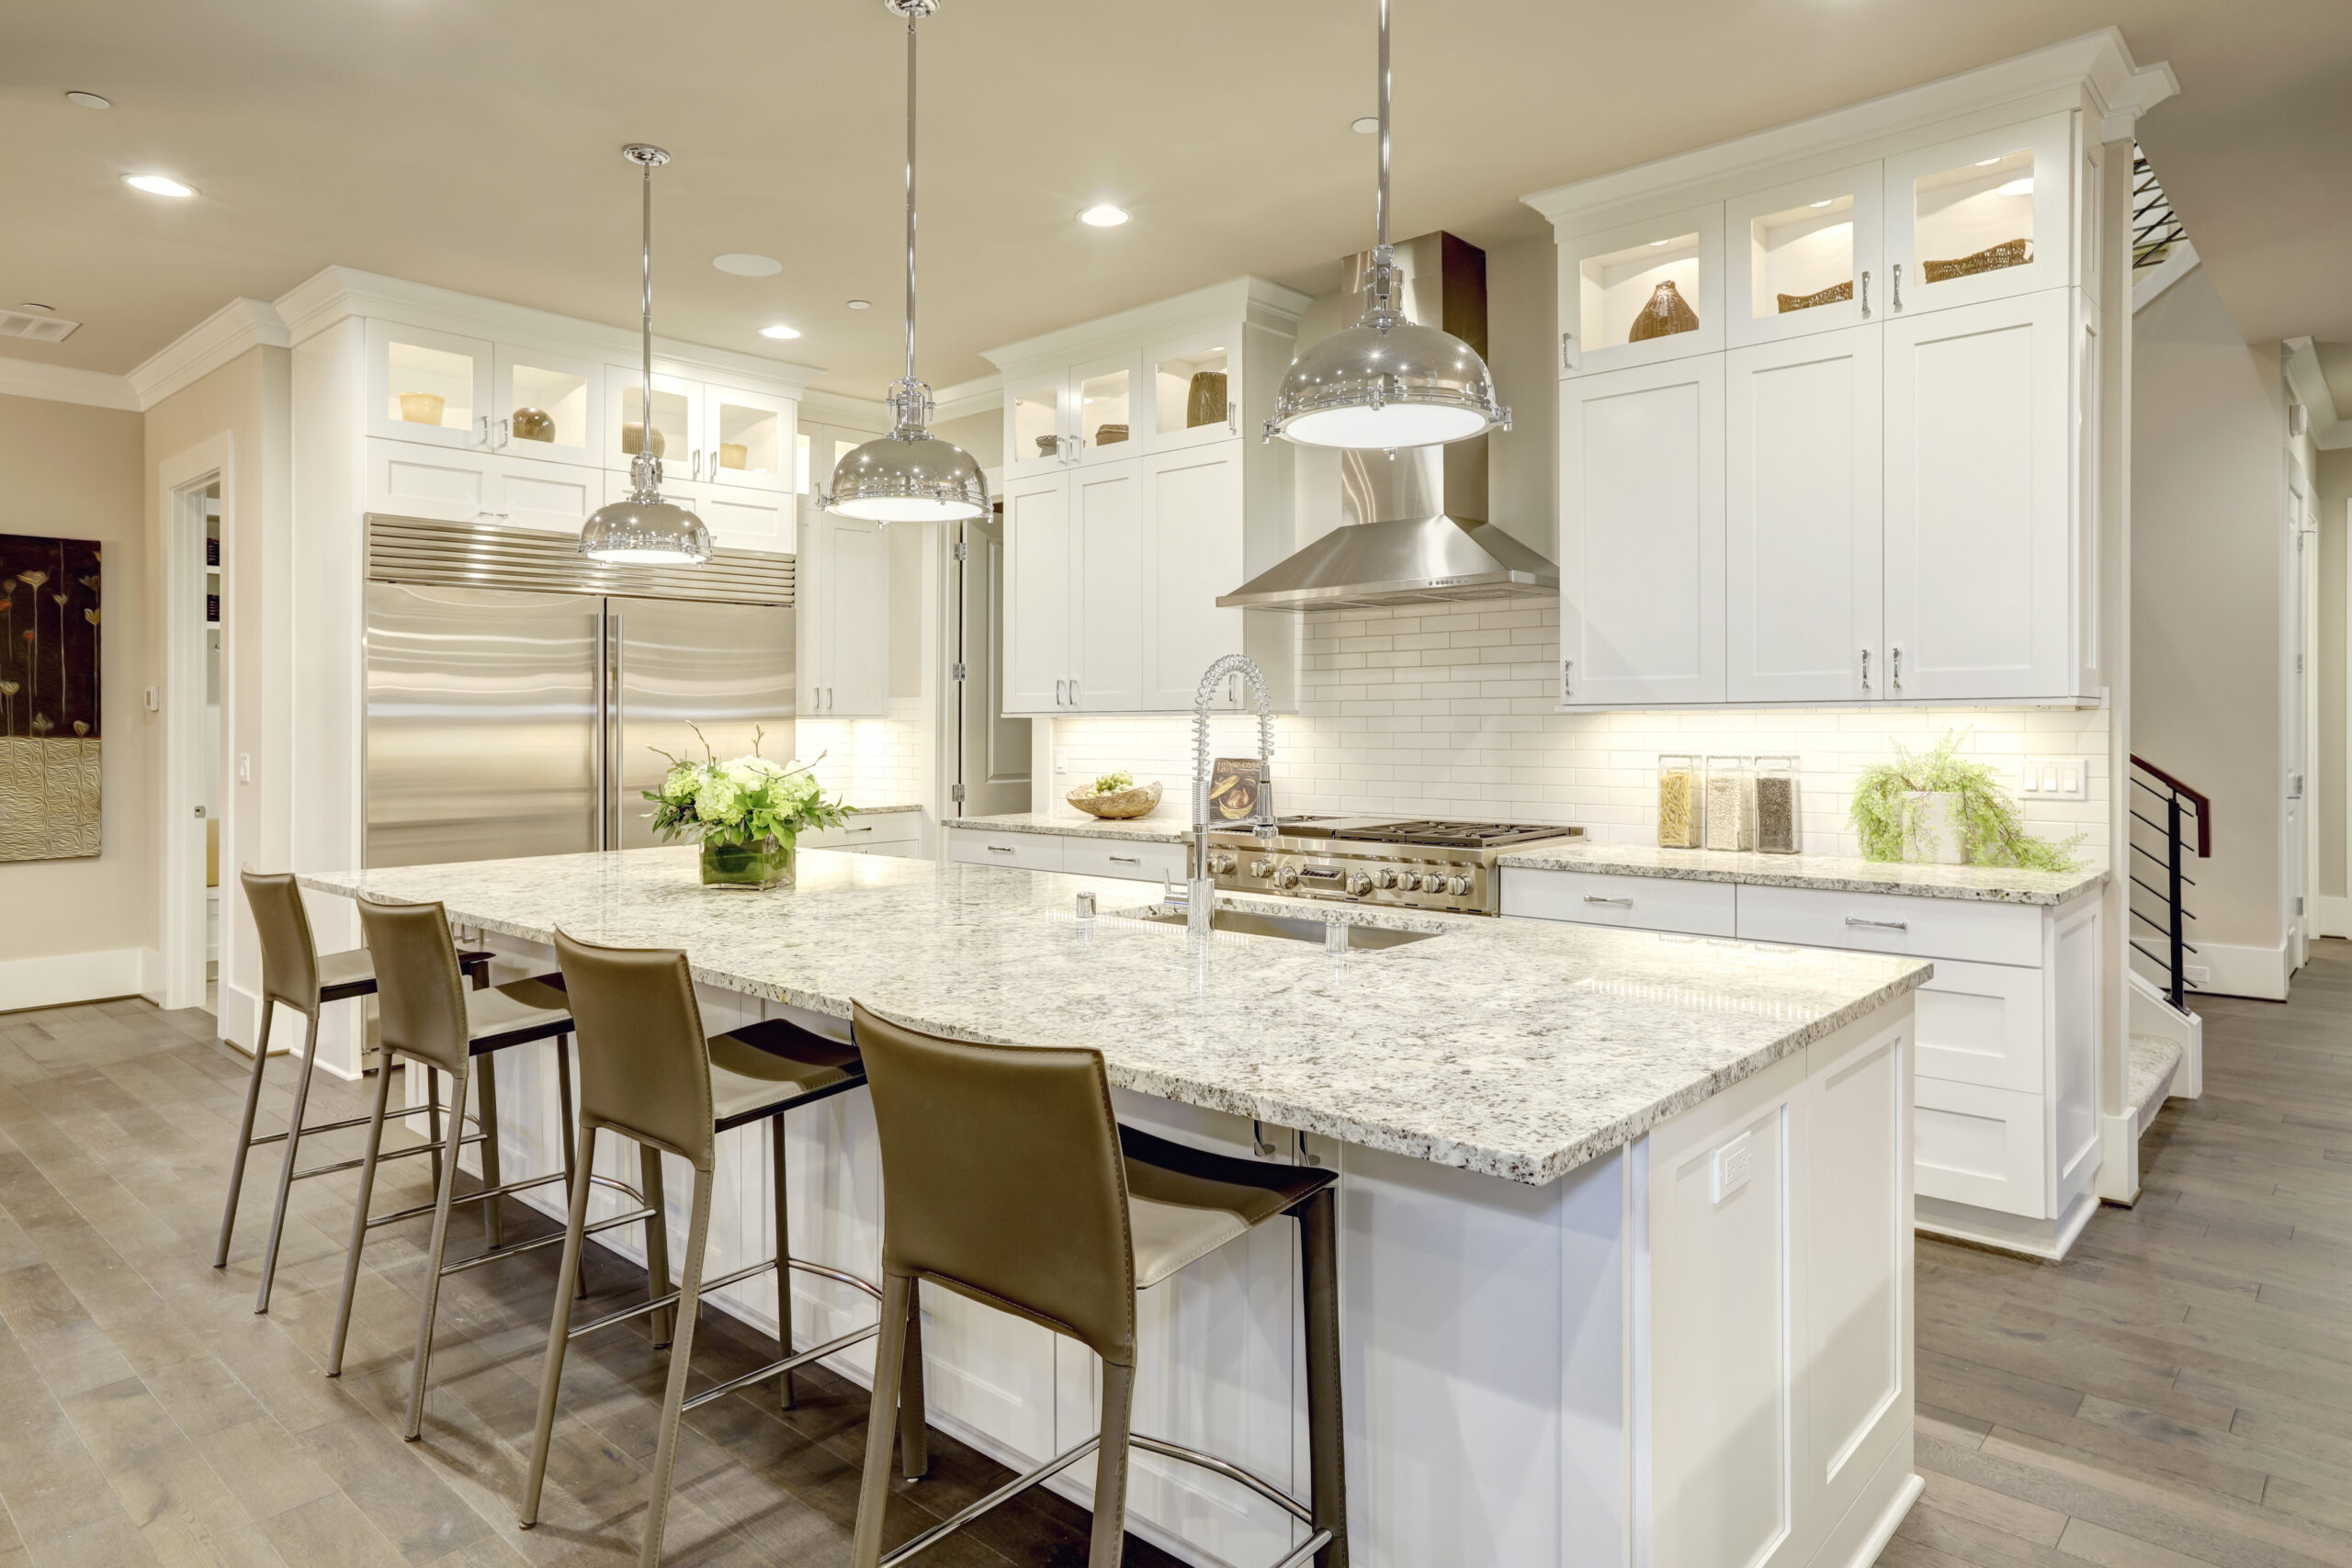 White kitchen design features large bar style kitchen island with granite countertop illuminated by modern pendant lights. Stainless steel appliances framed by white shaker cabinets . Northwest, USA